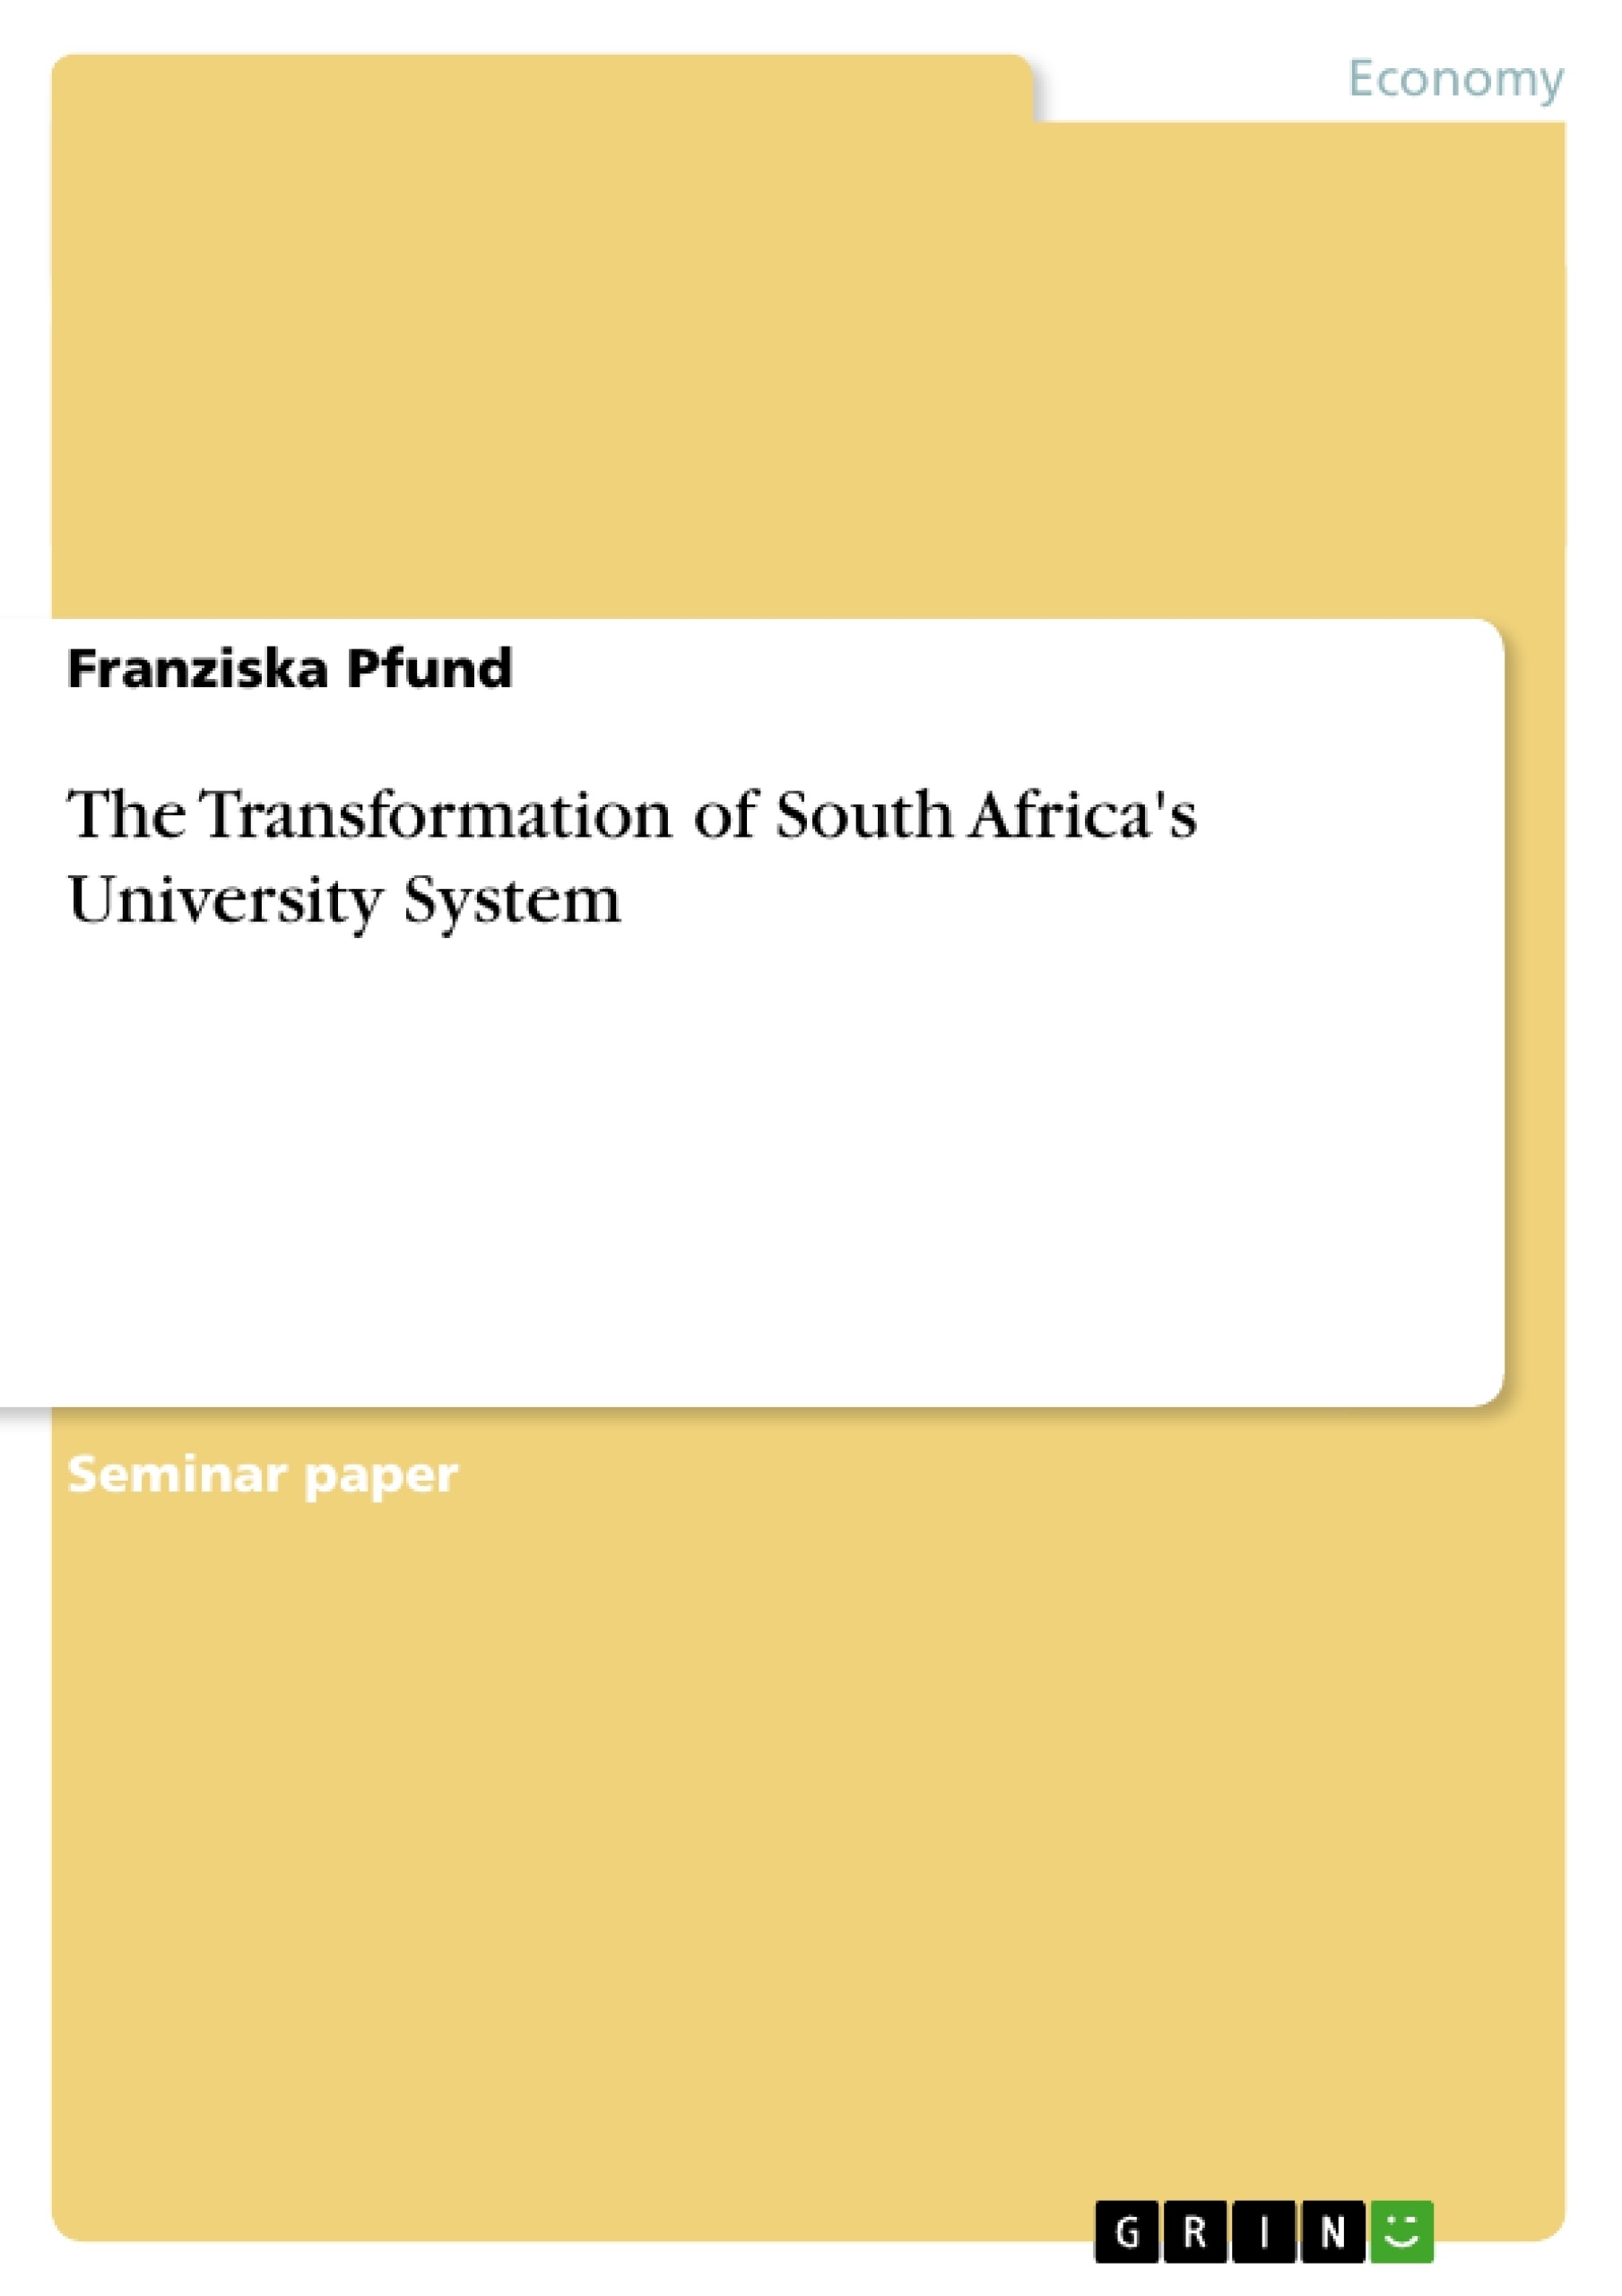 Título: The Transformation of South Africa's University System